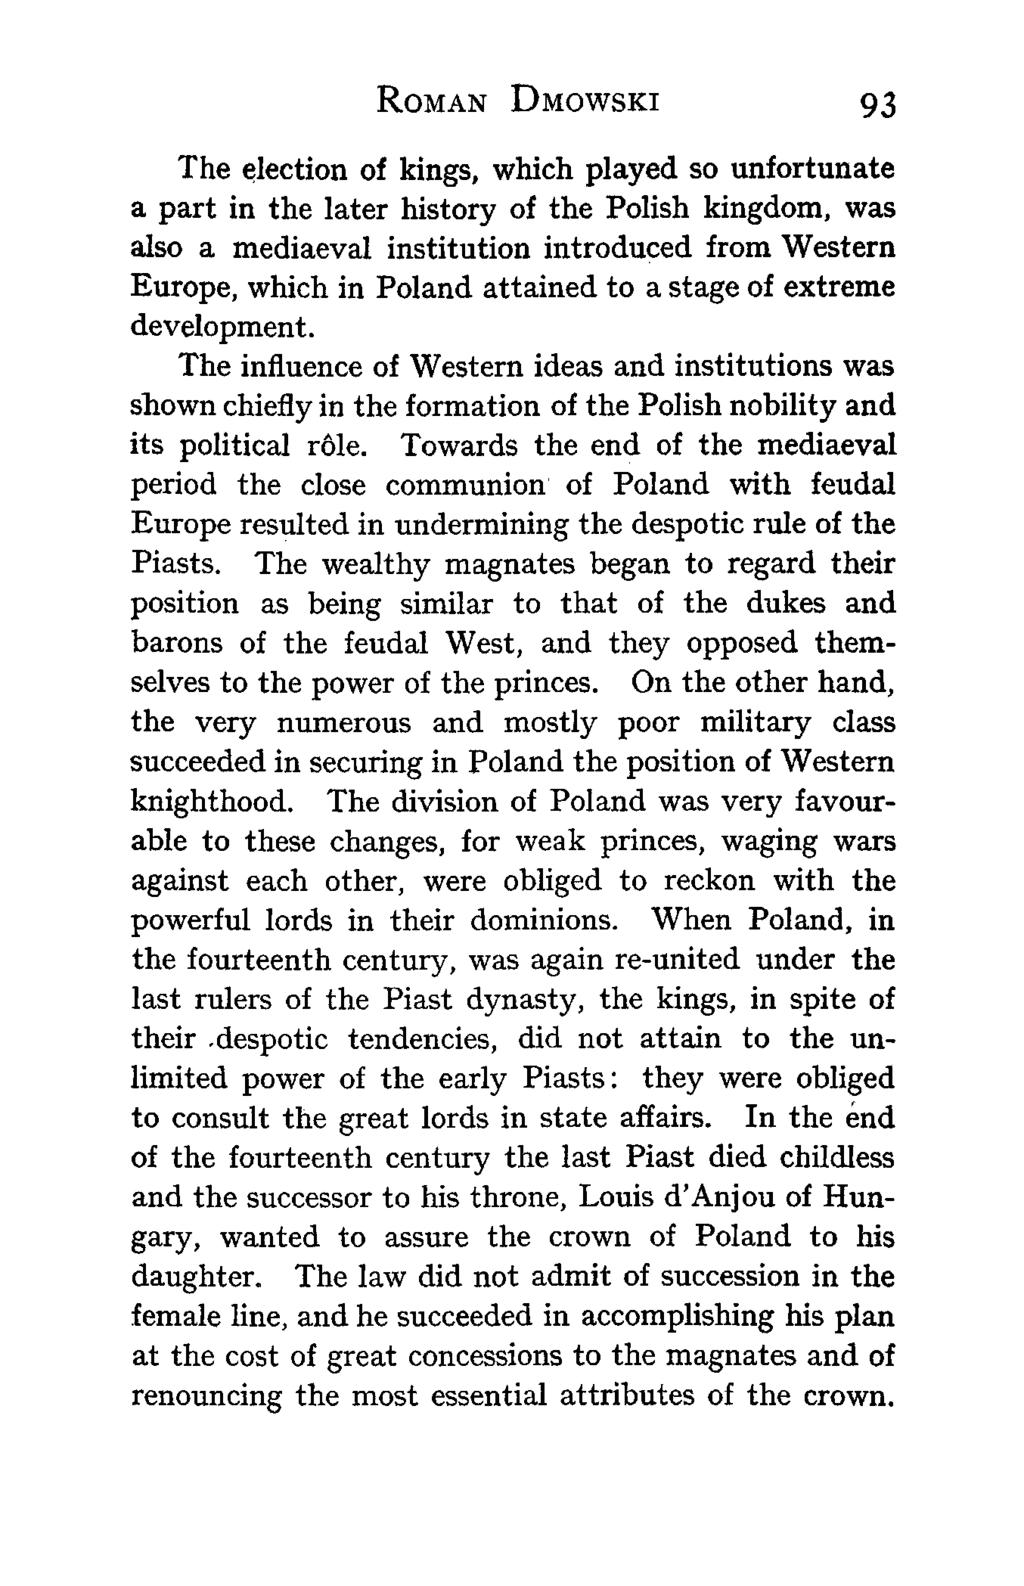 ROMAN DMOWSKI 93 The election of kings, which played so unfortunate a part in the later history of the Polish kingdom, was also a mediaeval institution introduced from Western Europe, which in Poland